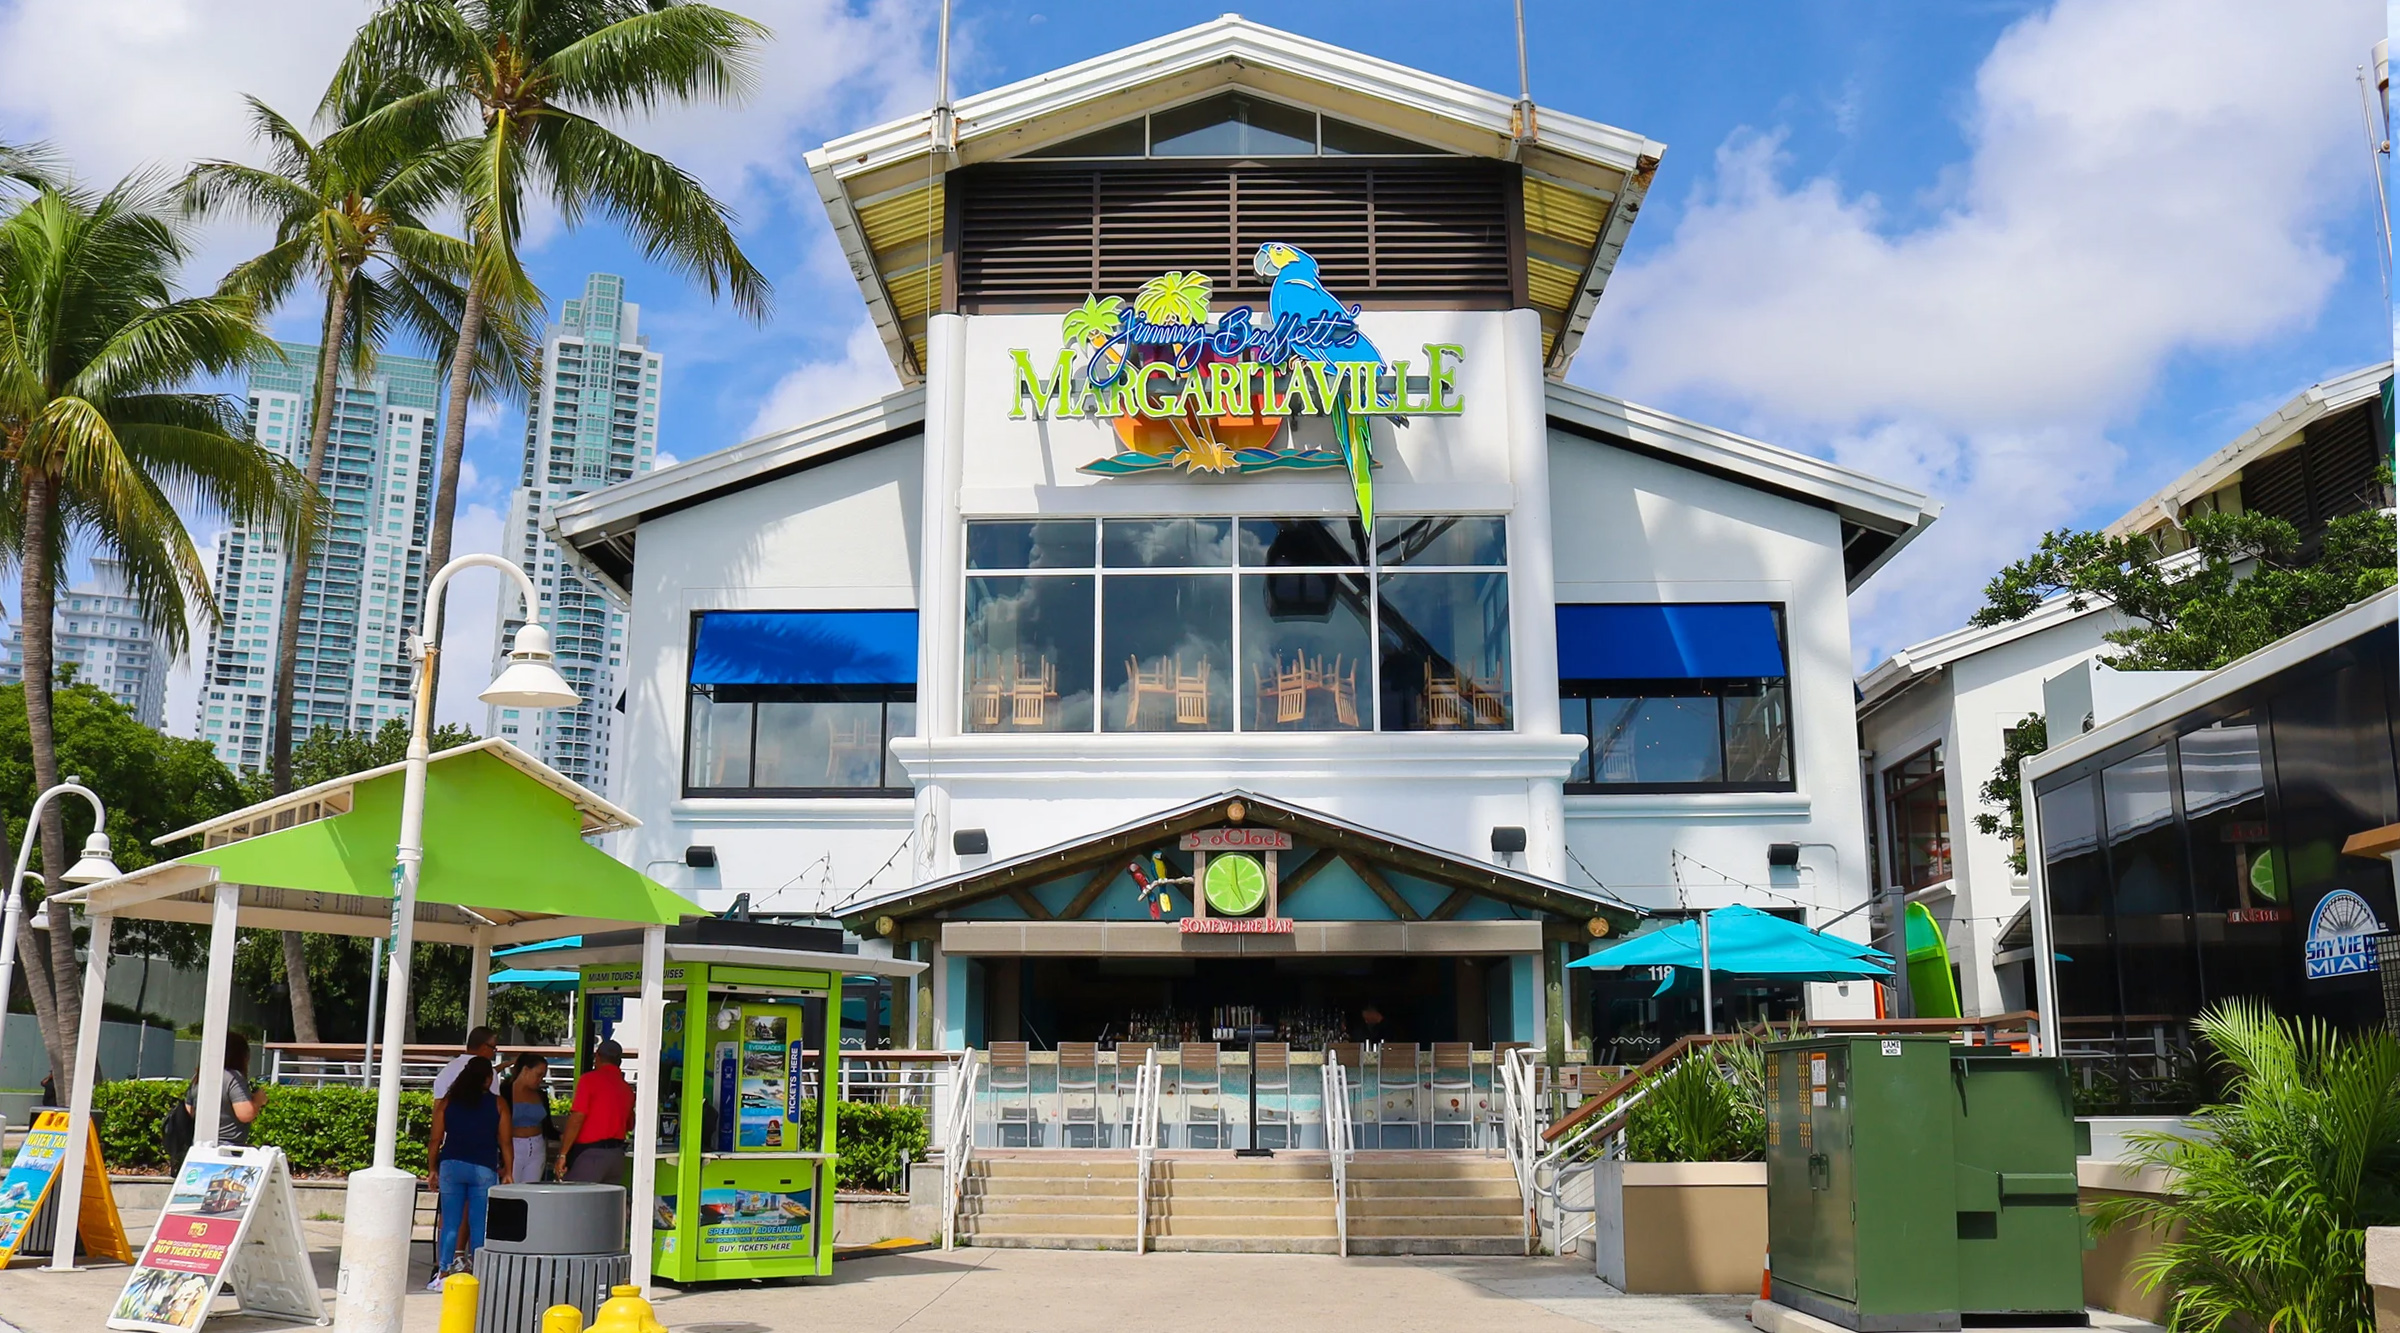 Have lunch at Margaritaville in Bayside Marketplace.